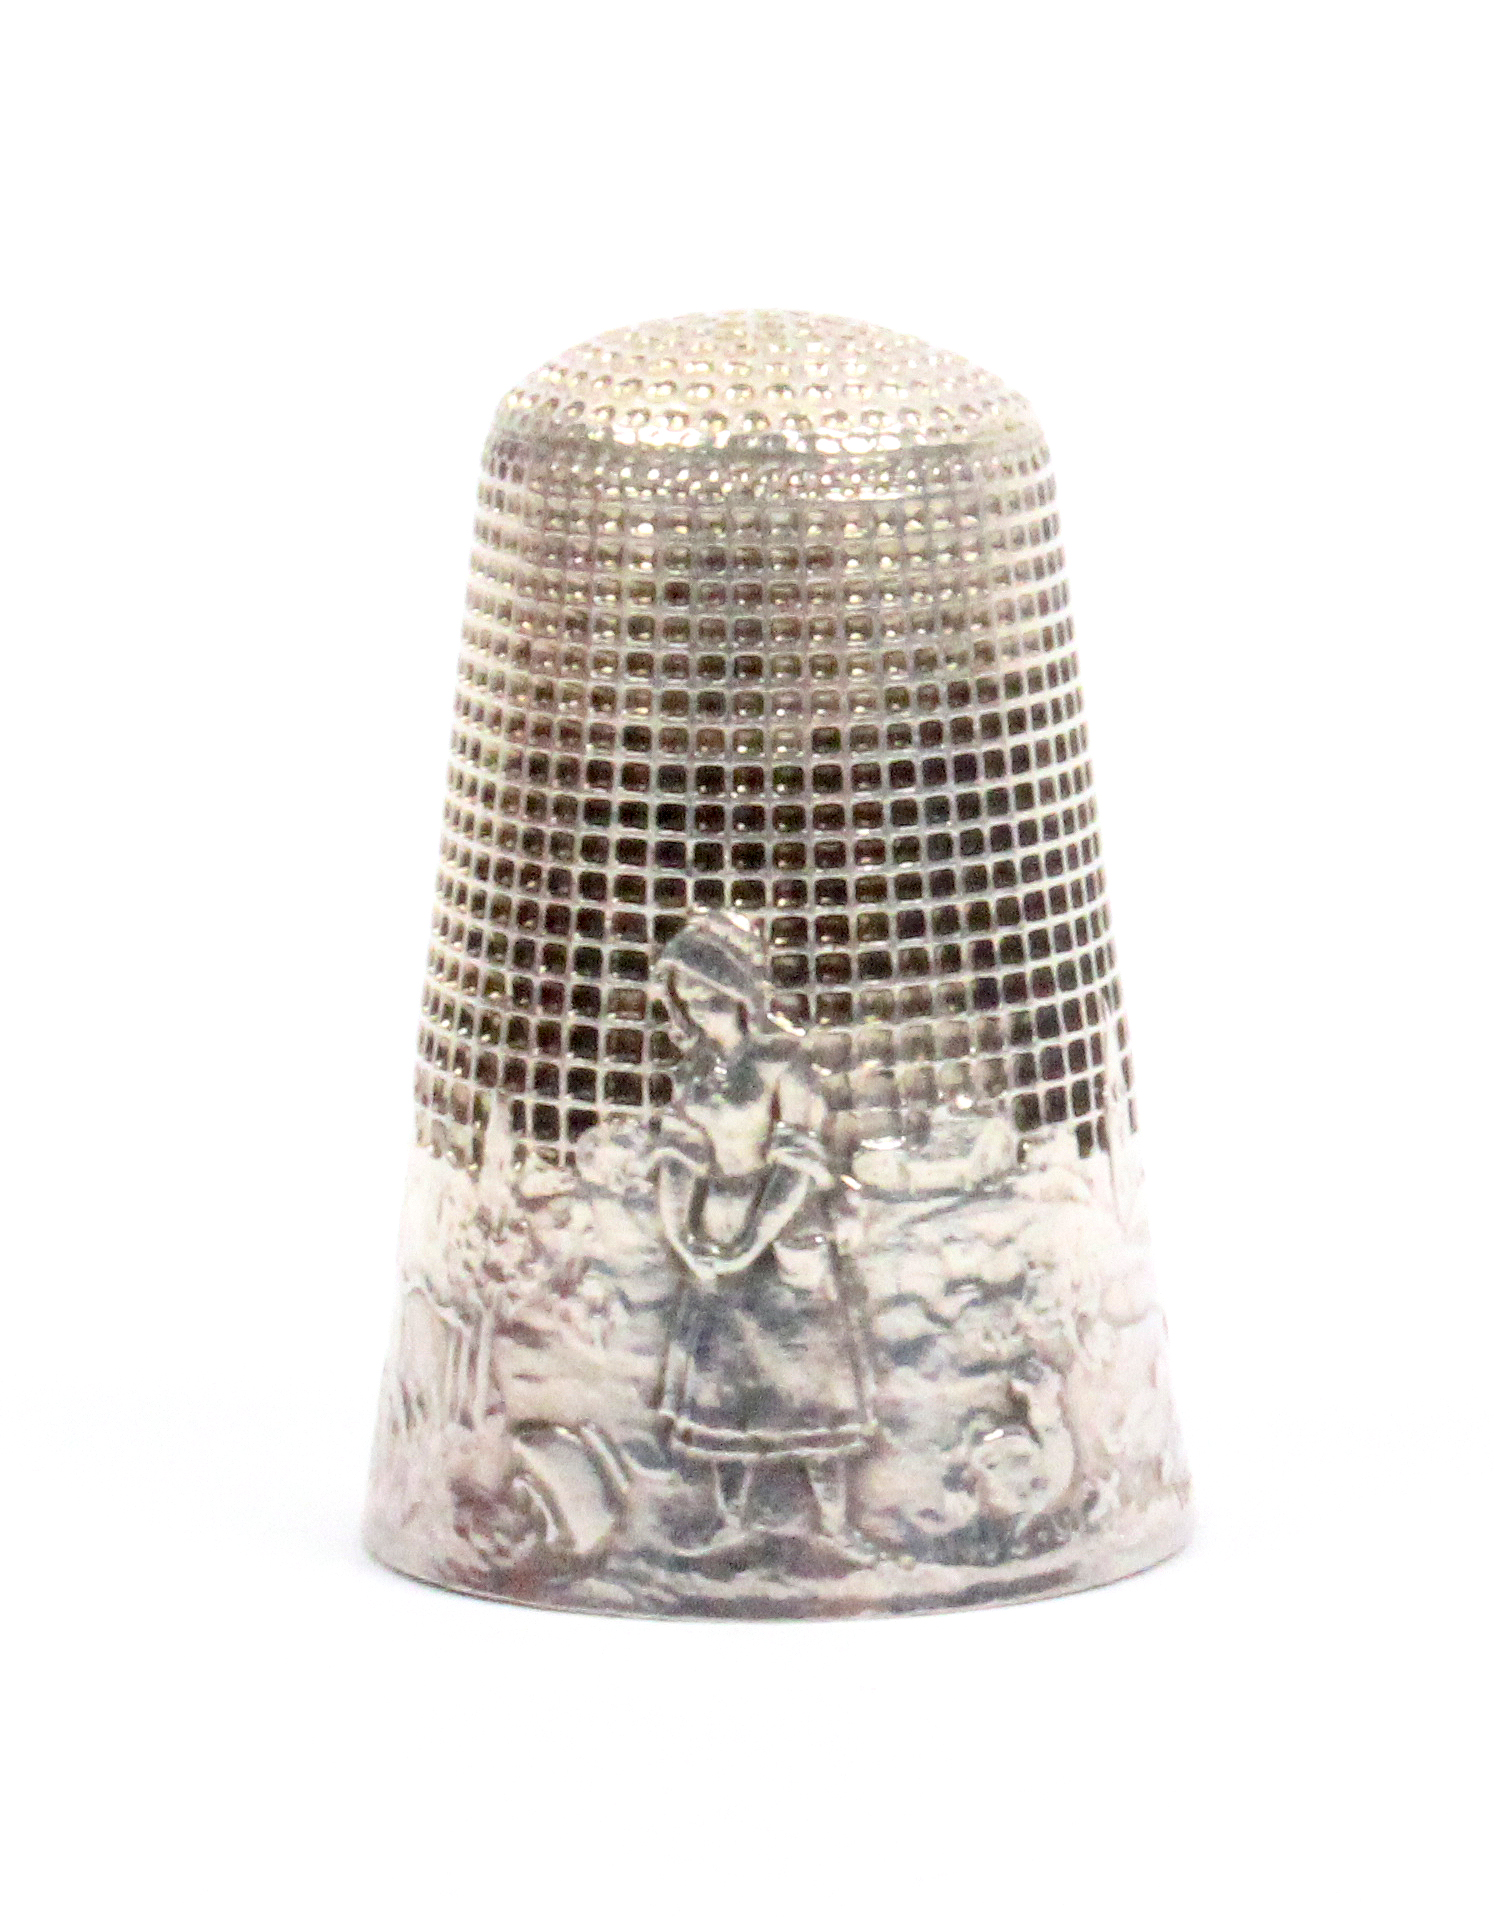 A French silver 'fairy tale' thimble, 'The Milkmaid and the Pot of Milk', with gate, village